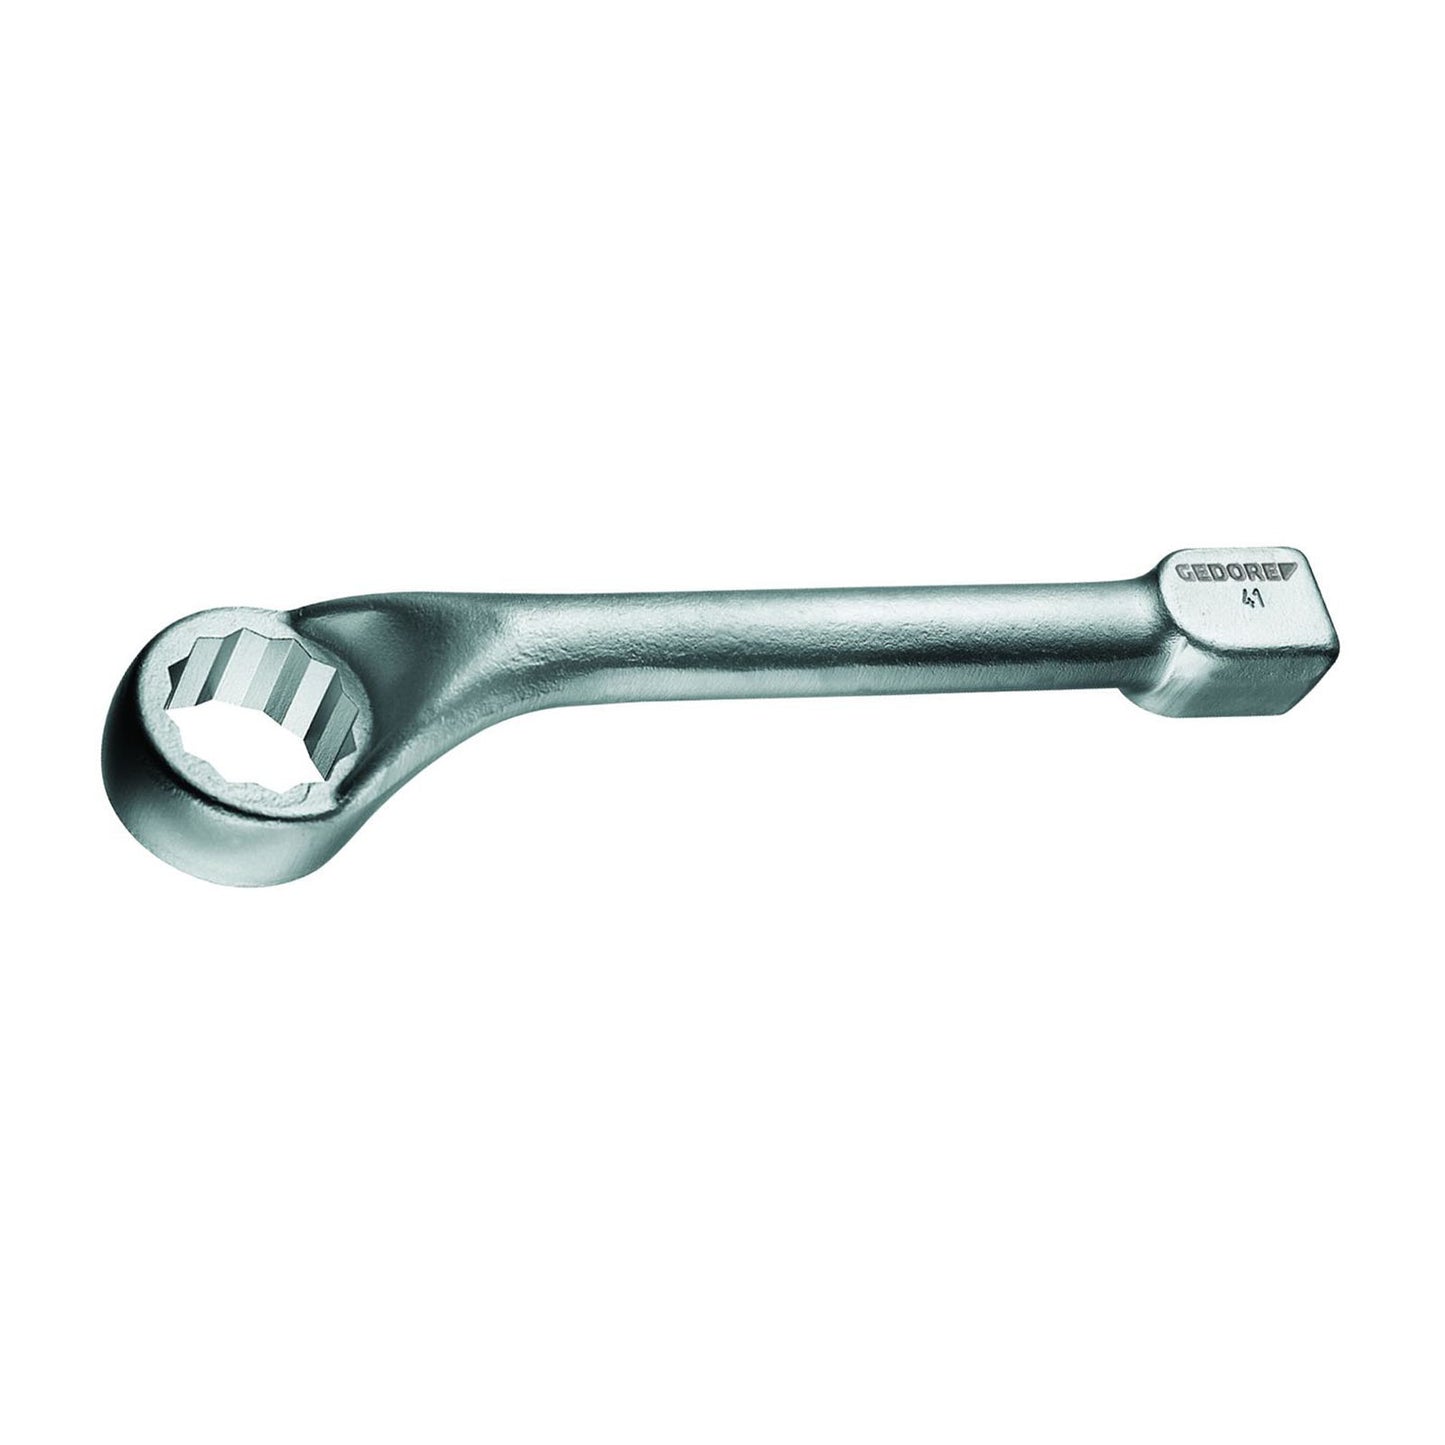 GEDORE 306 G 27 - Offset Wrench, 27mm (1415875)